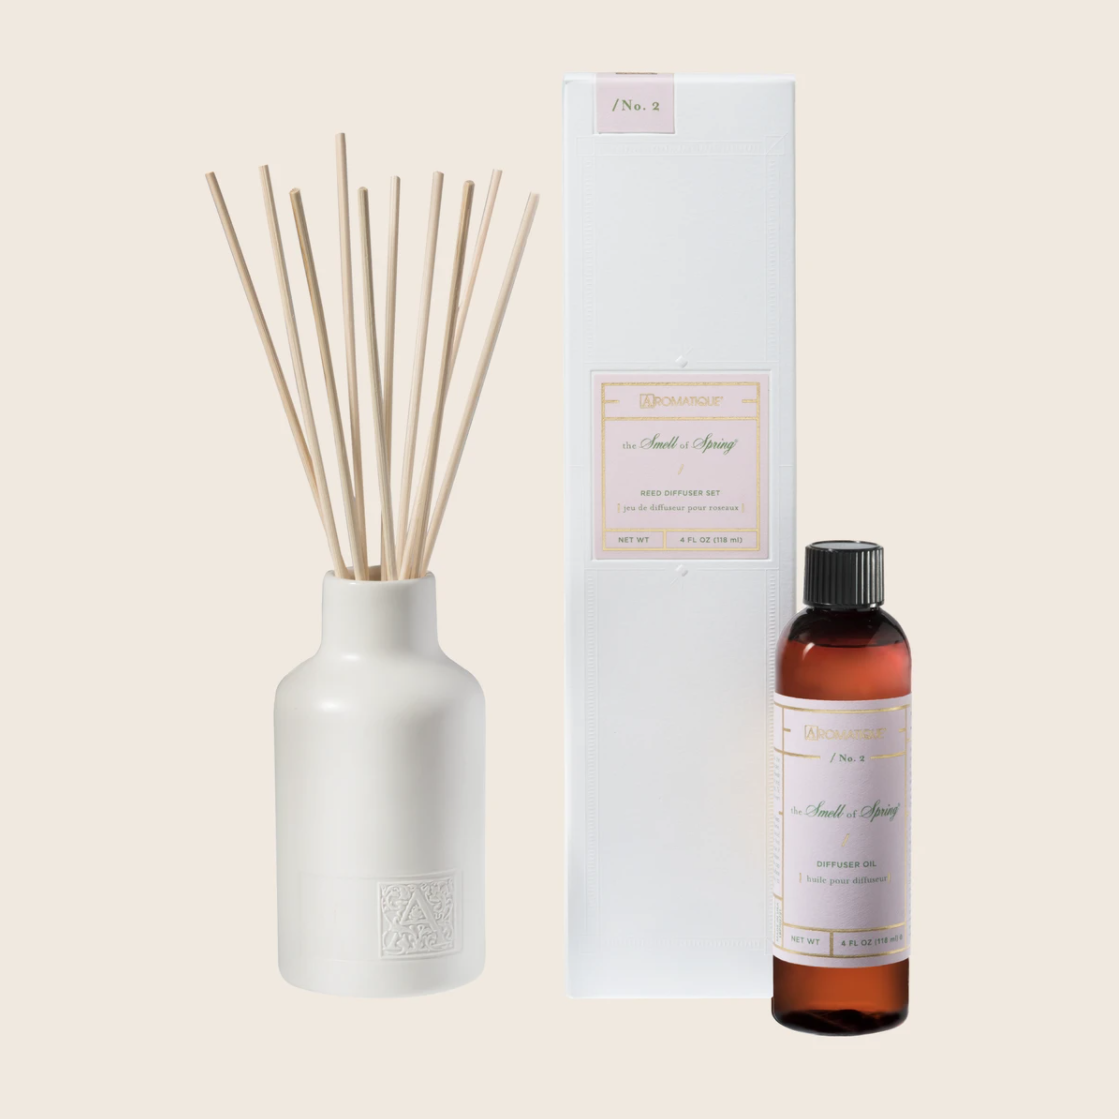 Smell of Spring Reed Diffuser Set